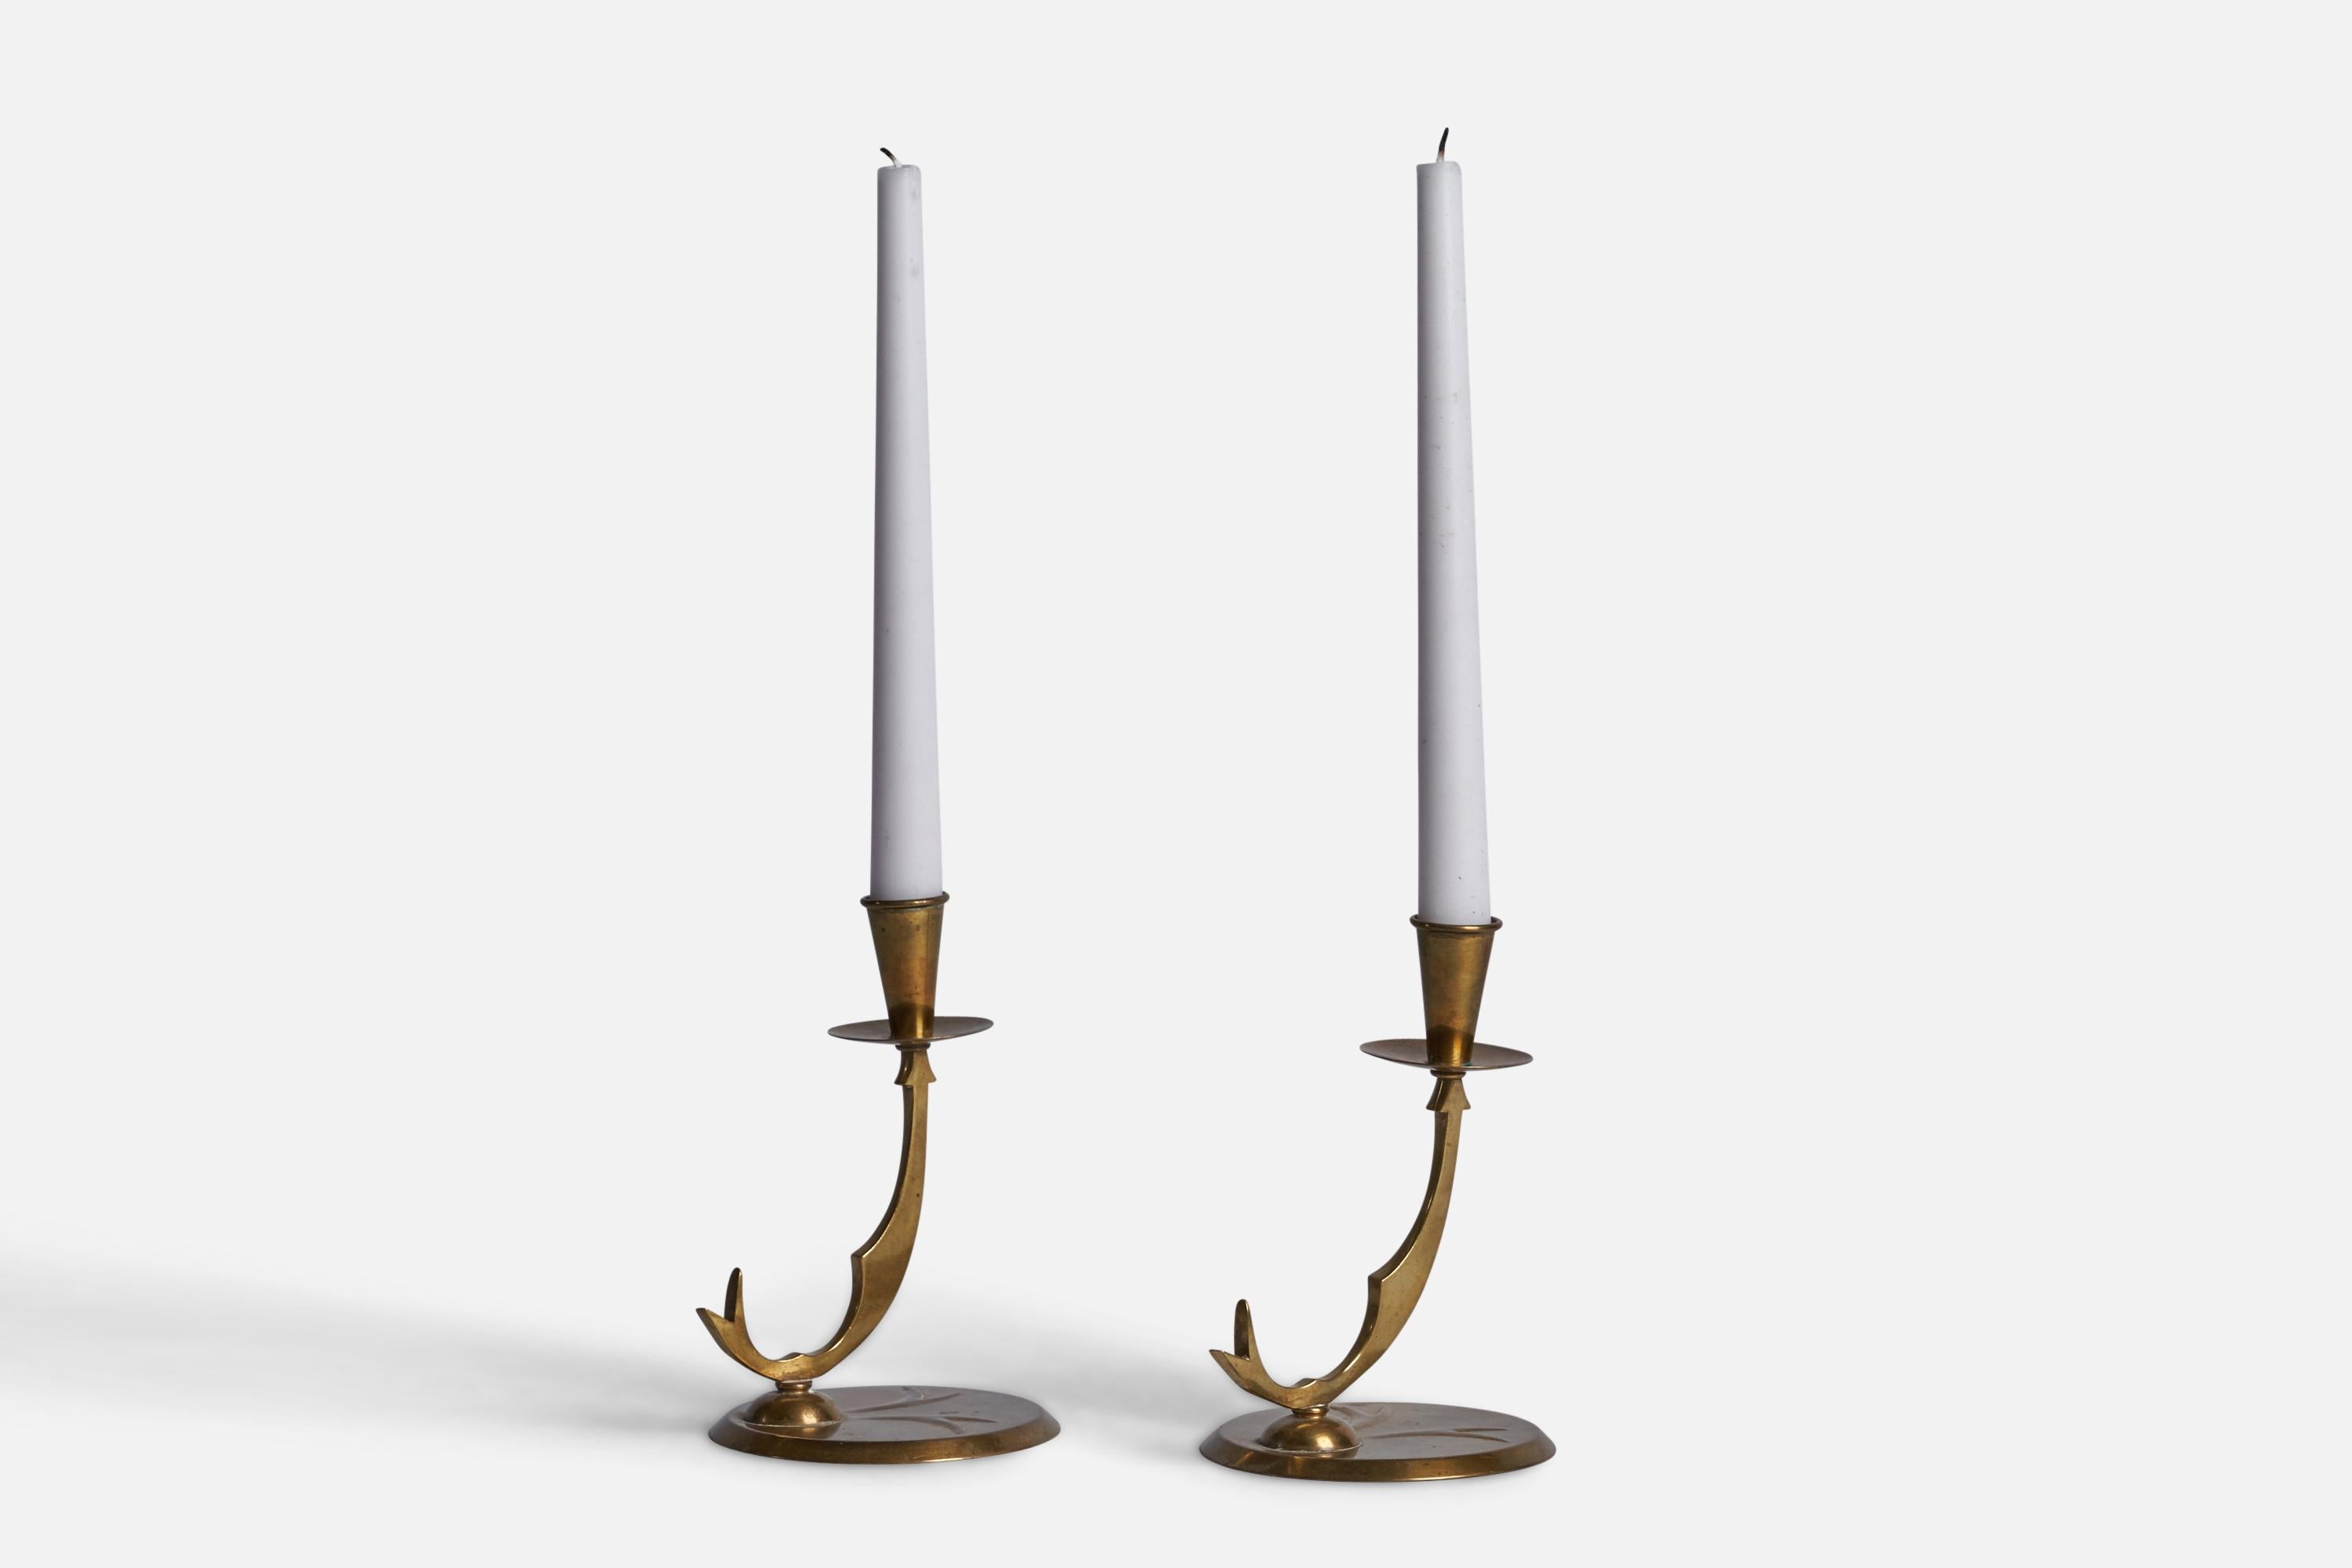 A pair of brass candlesticks designed and produced in Sweden, c. 1940s.

Holds 0.8” candles